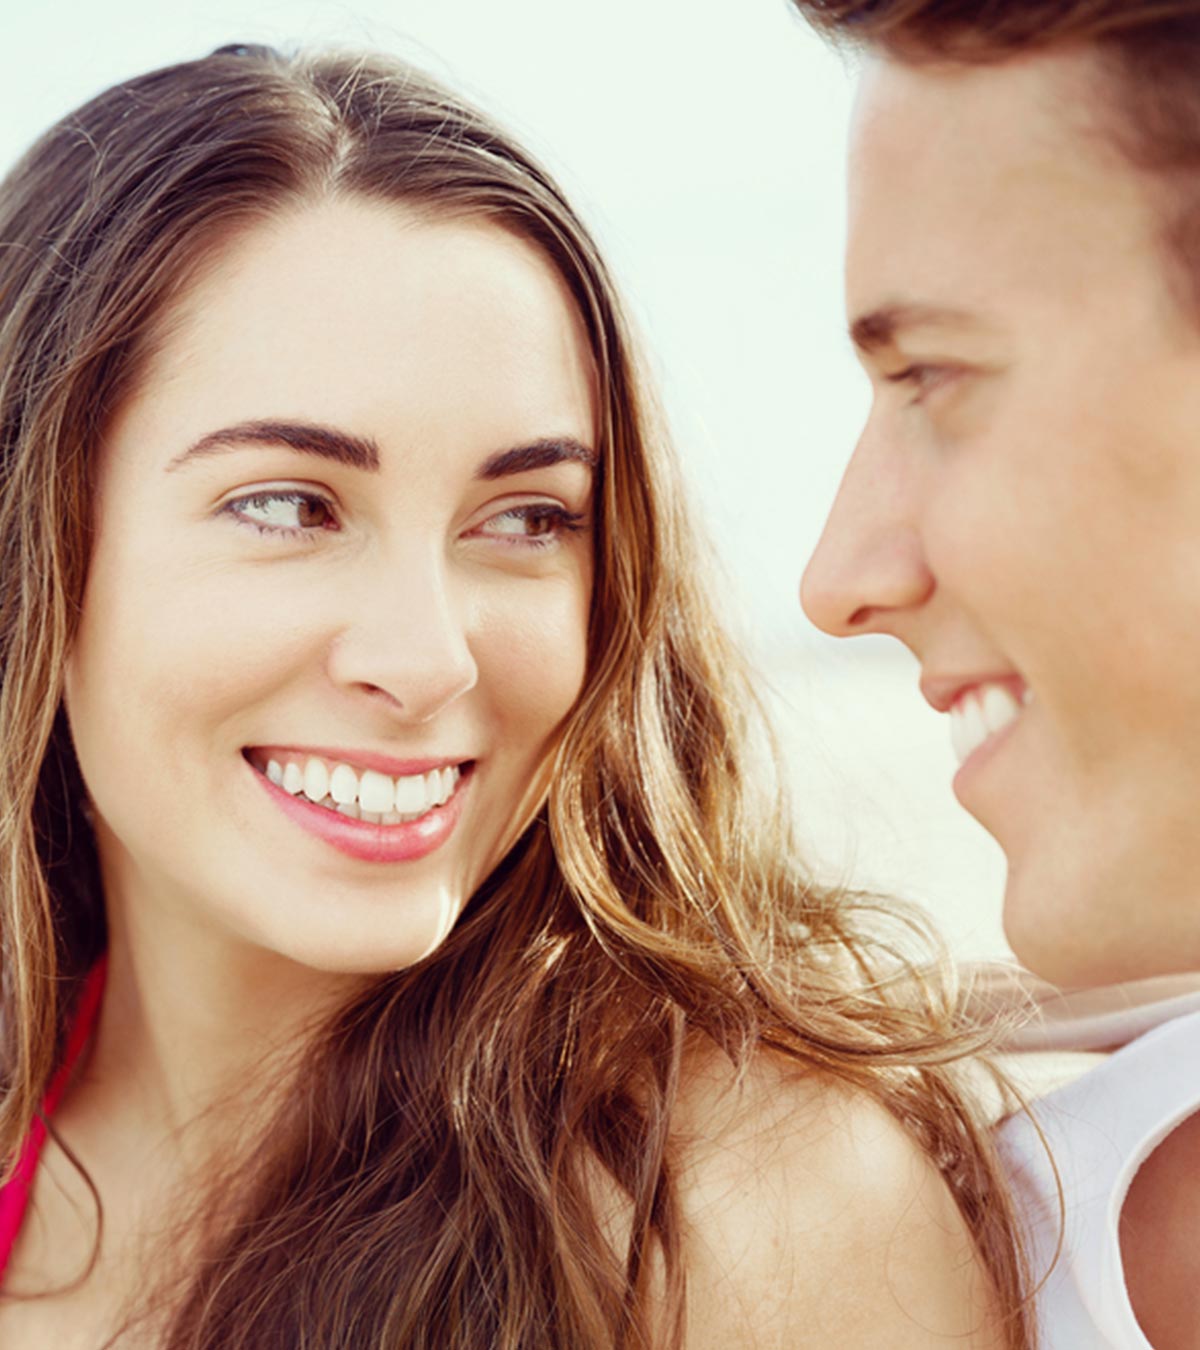 'Do I Love Him?' 25 Clear Signs To Know You’re In Love